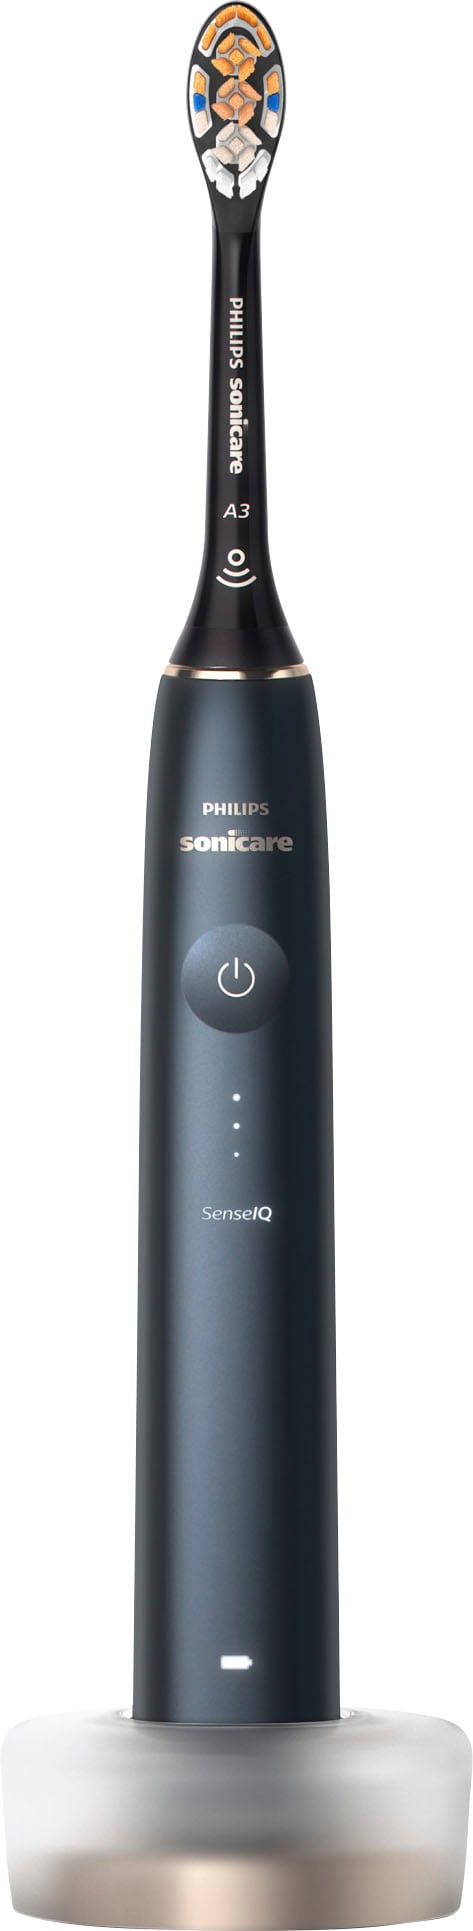 Philips Sonicare 9900 Prestige Rechargeable Electric Toothbrush with SenseIQ - Midnight_9